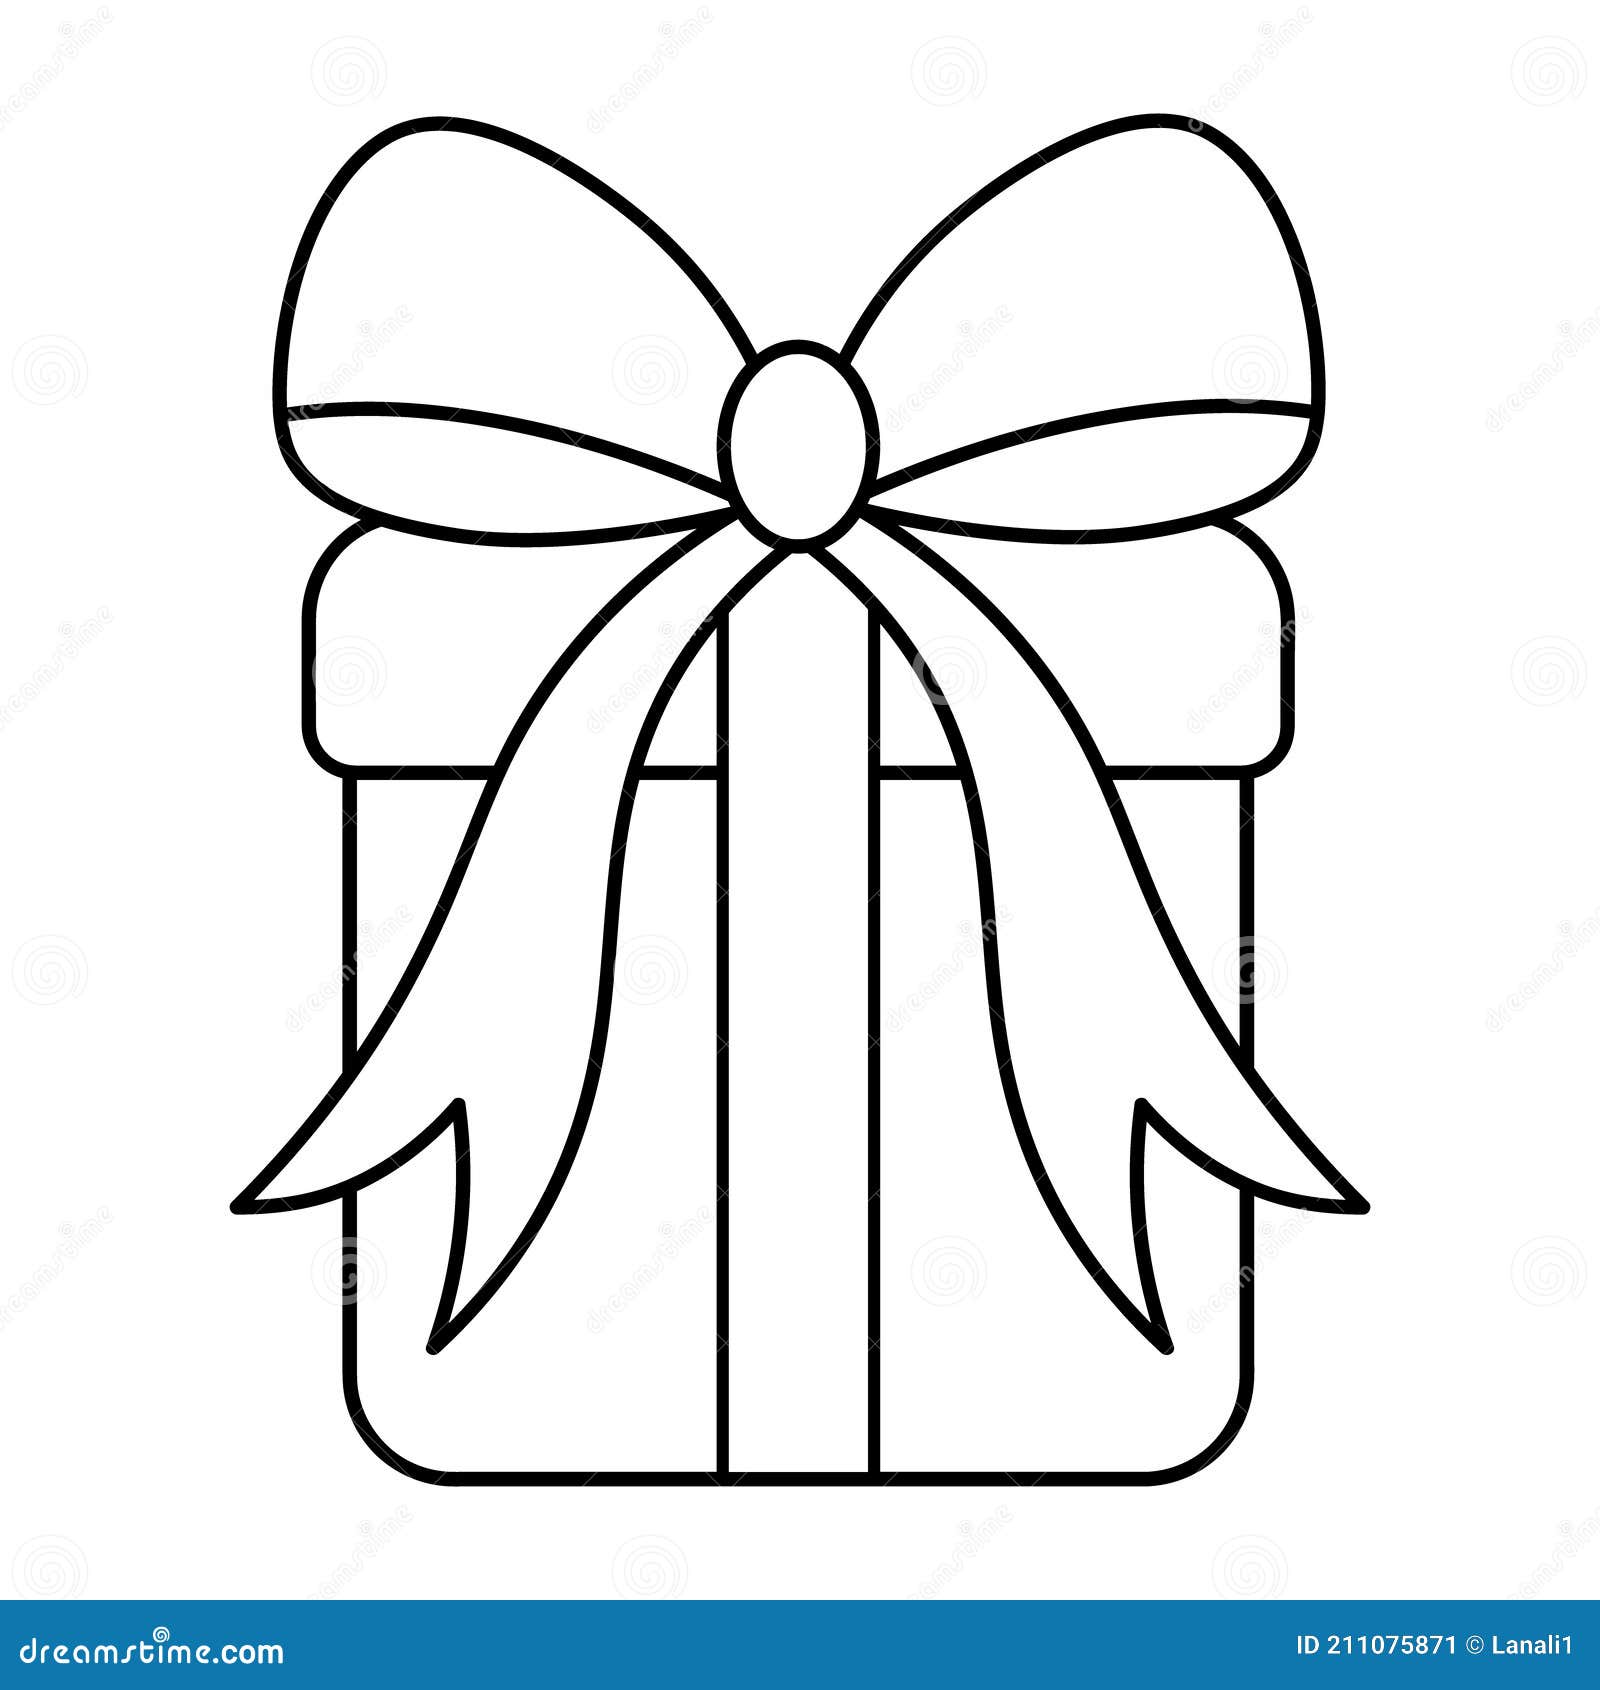 https://thumbs.dreamstime.com/z/gift-box-tied-bow-sketch-surprise-vector-illustration-isolated-white-background-coloring-book-children-doodle-211075871.jpg